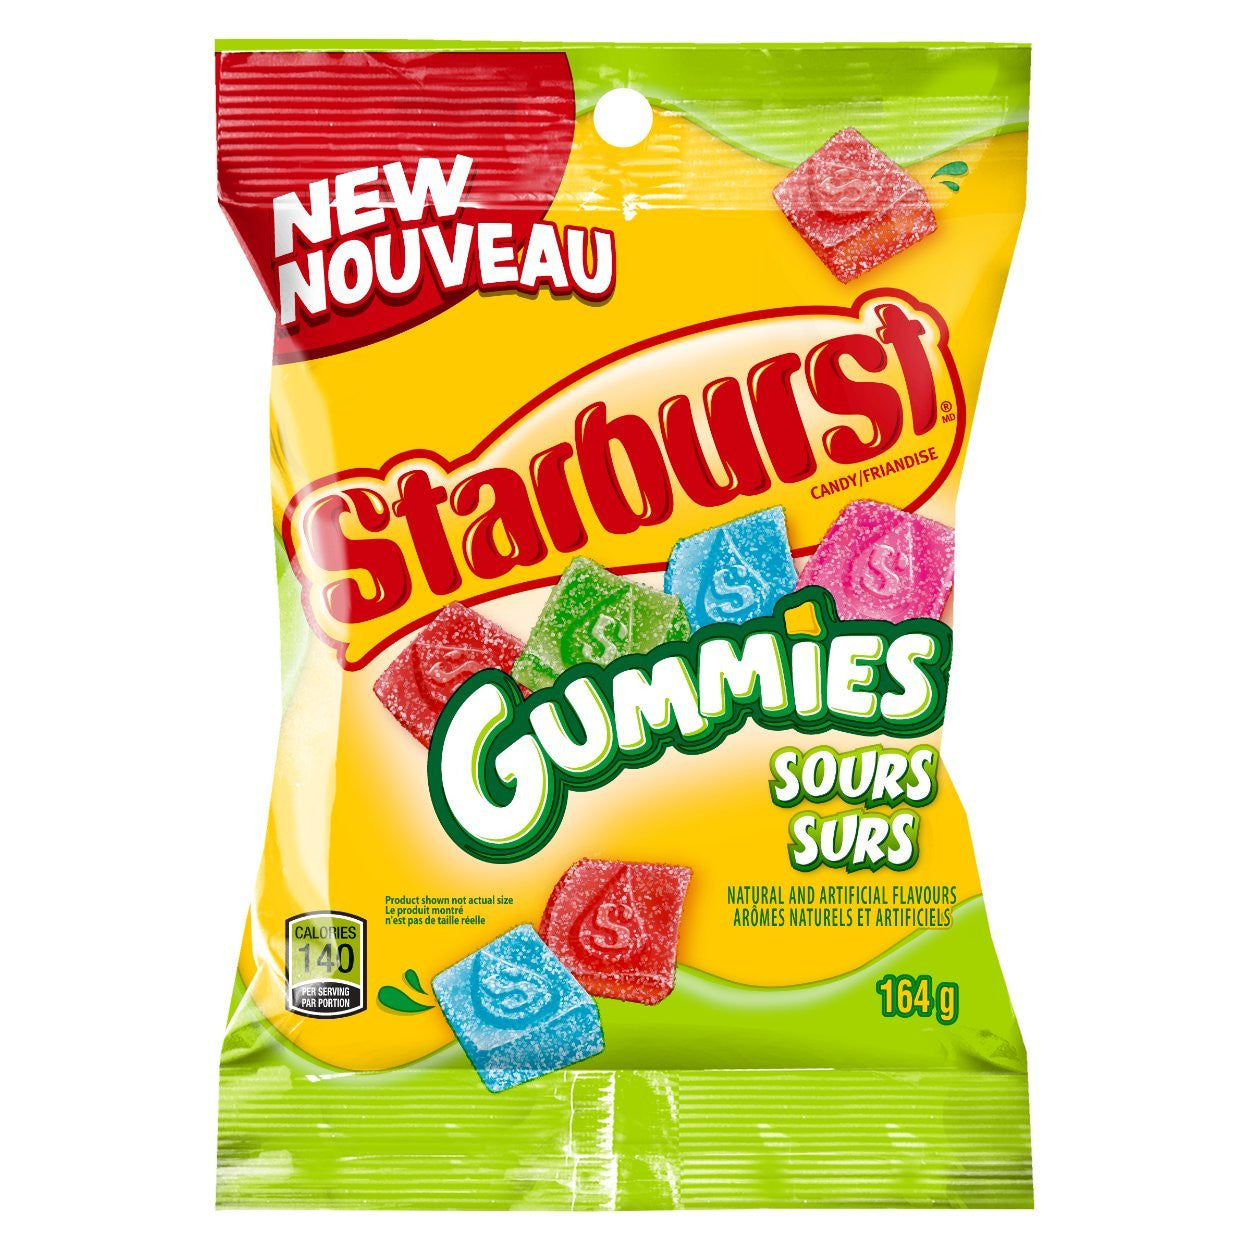 Starburst Gummies Sours Candy 164g/5.8oz, (Imported from Canada)